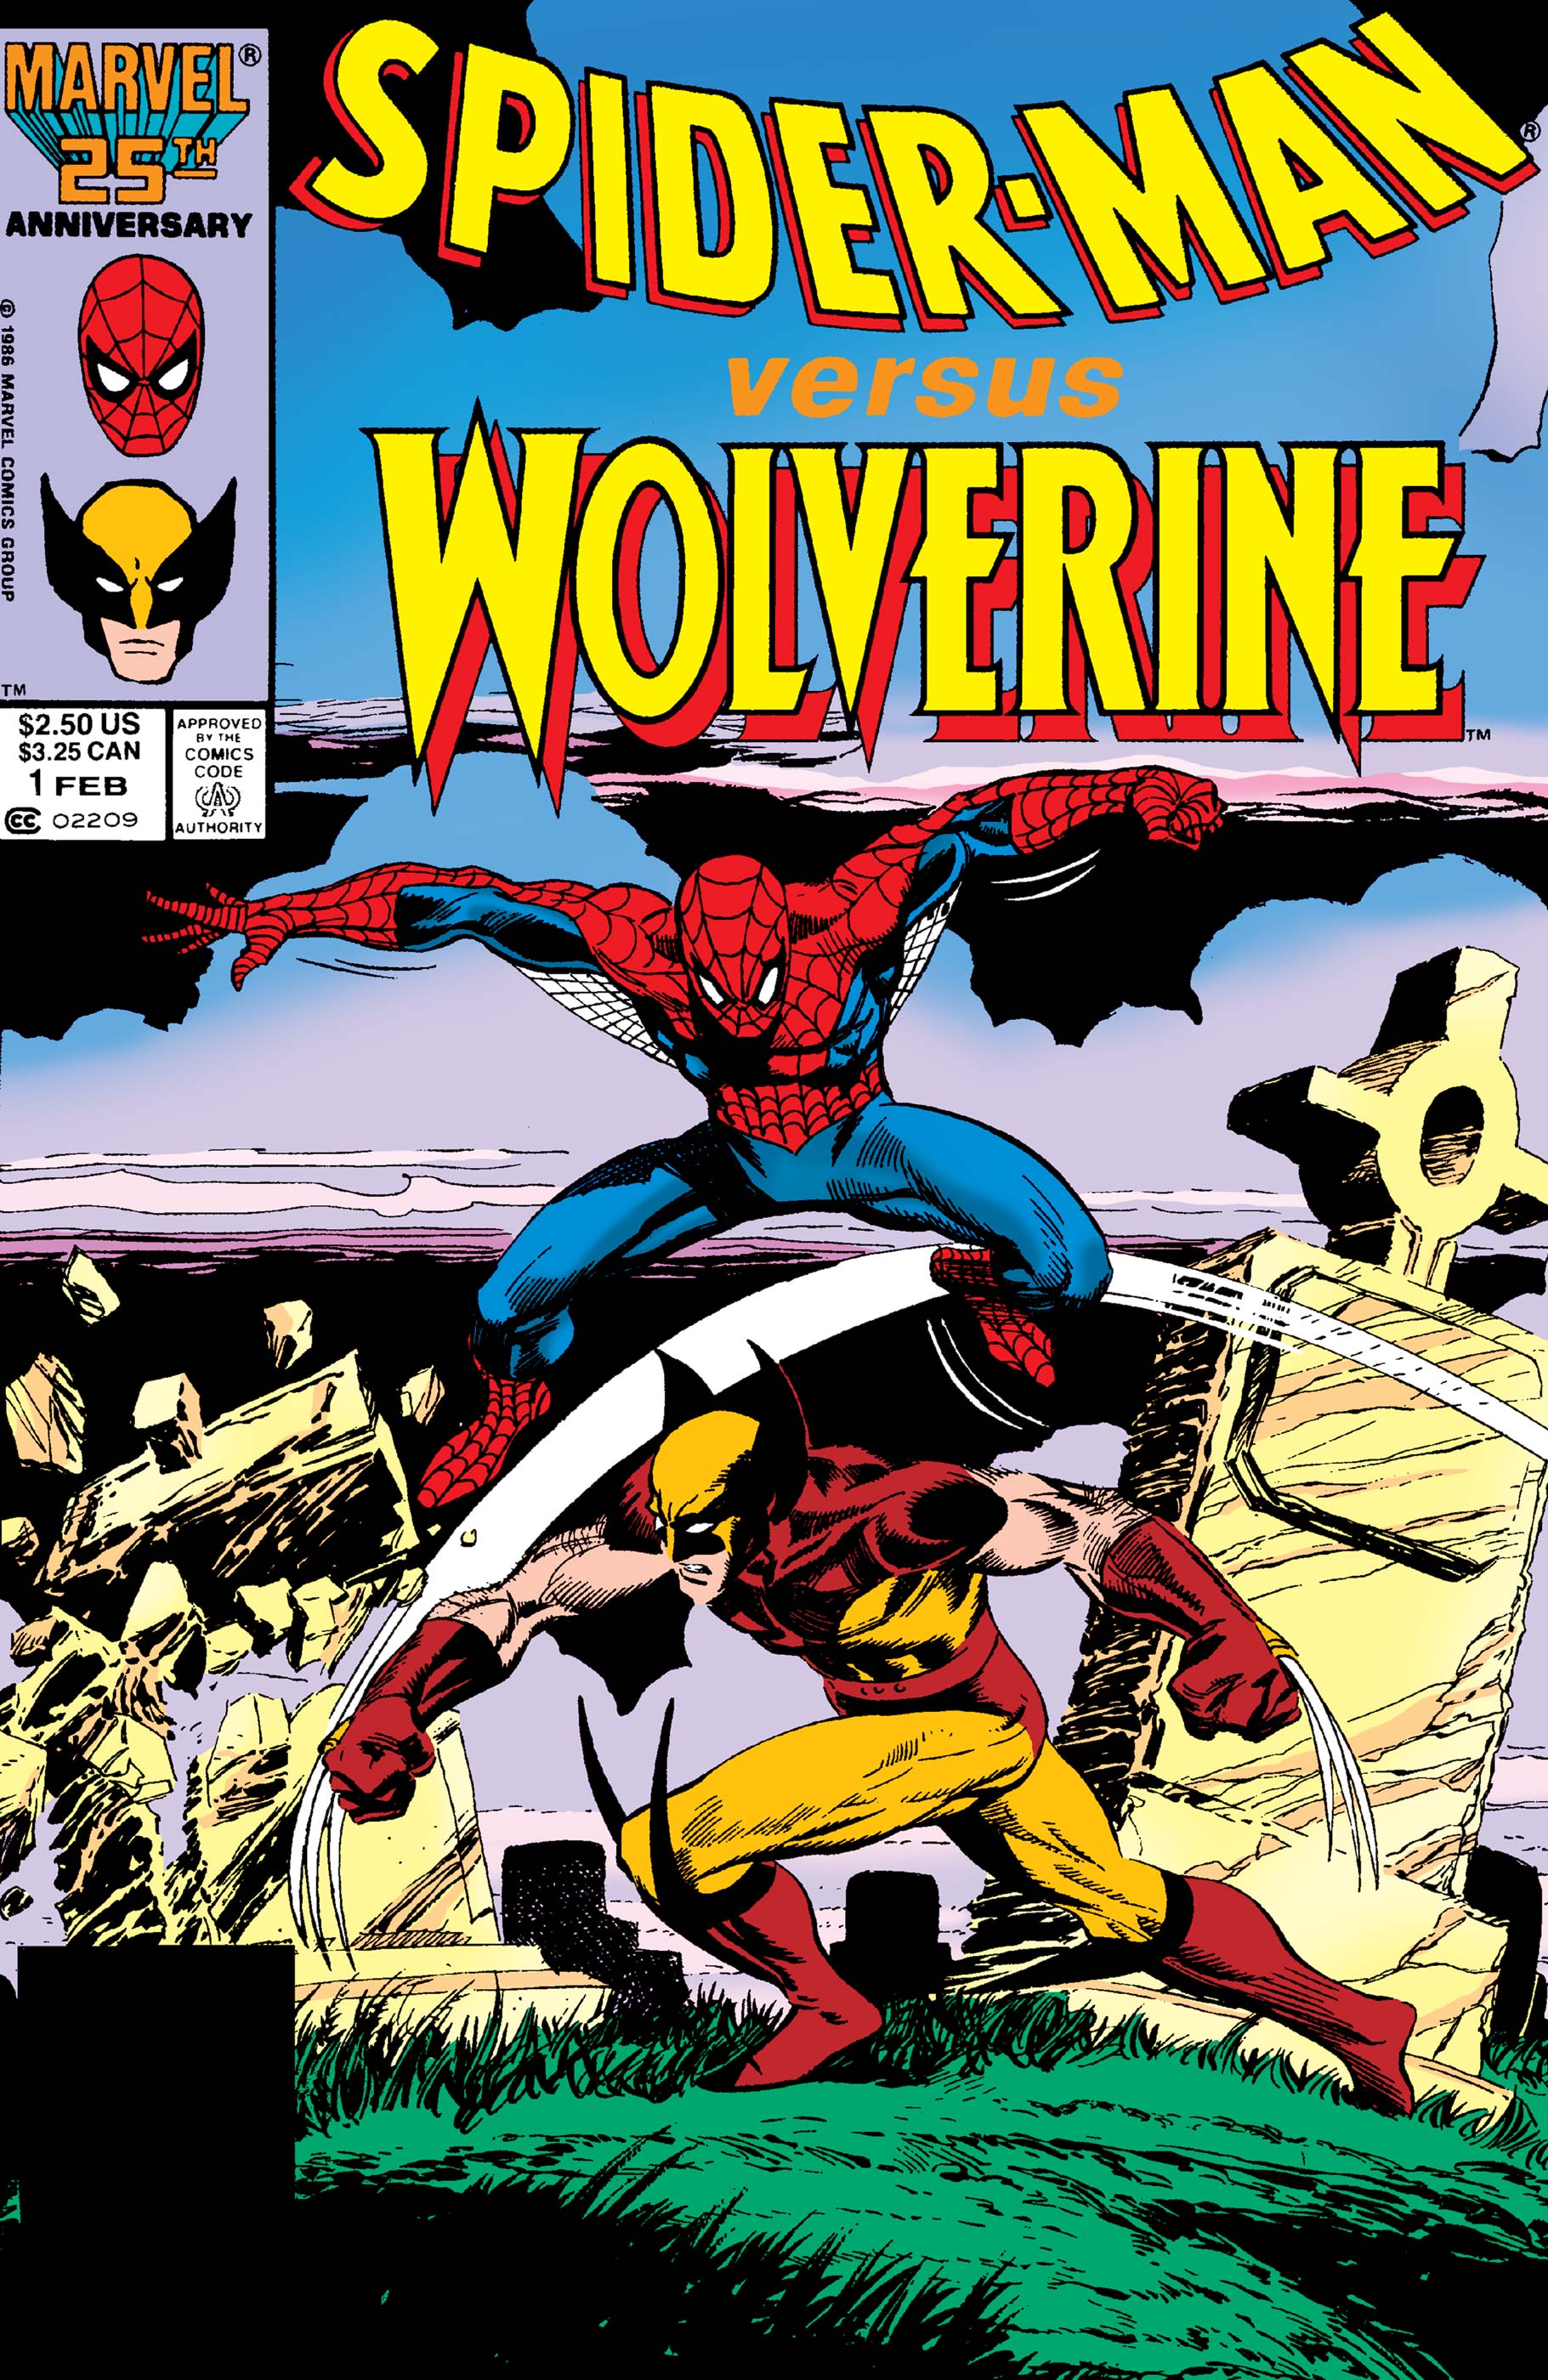 Spiderman and wolverine comic